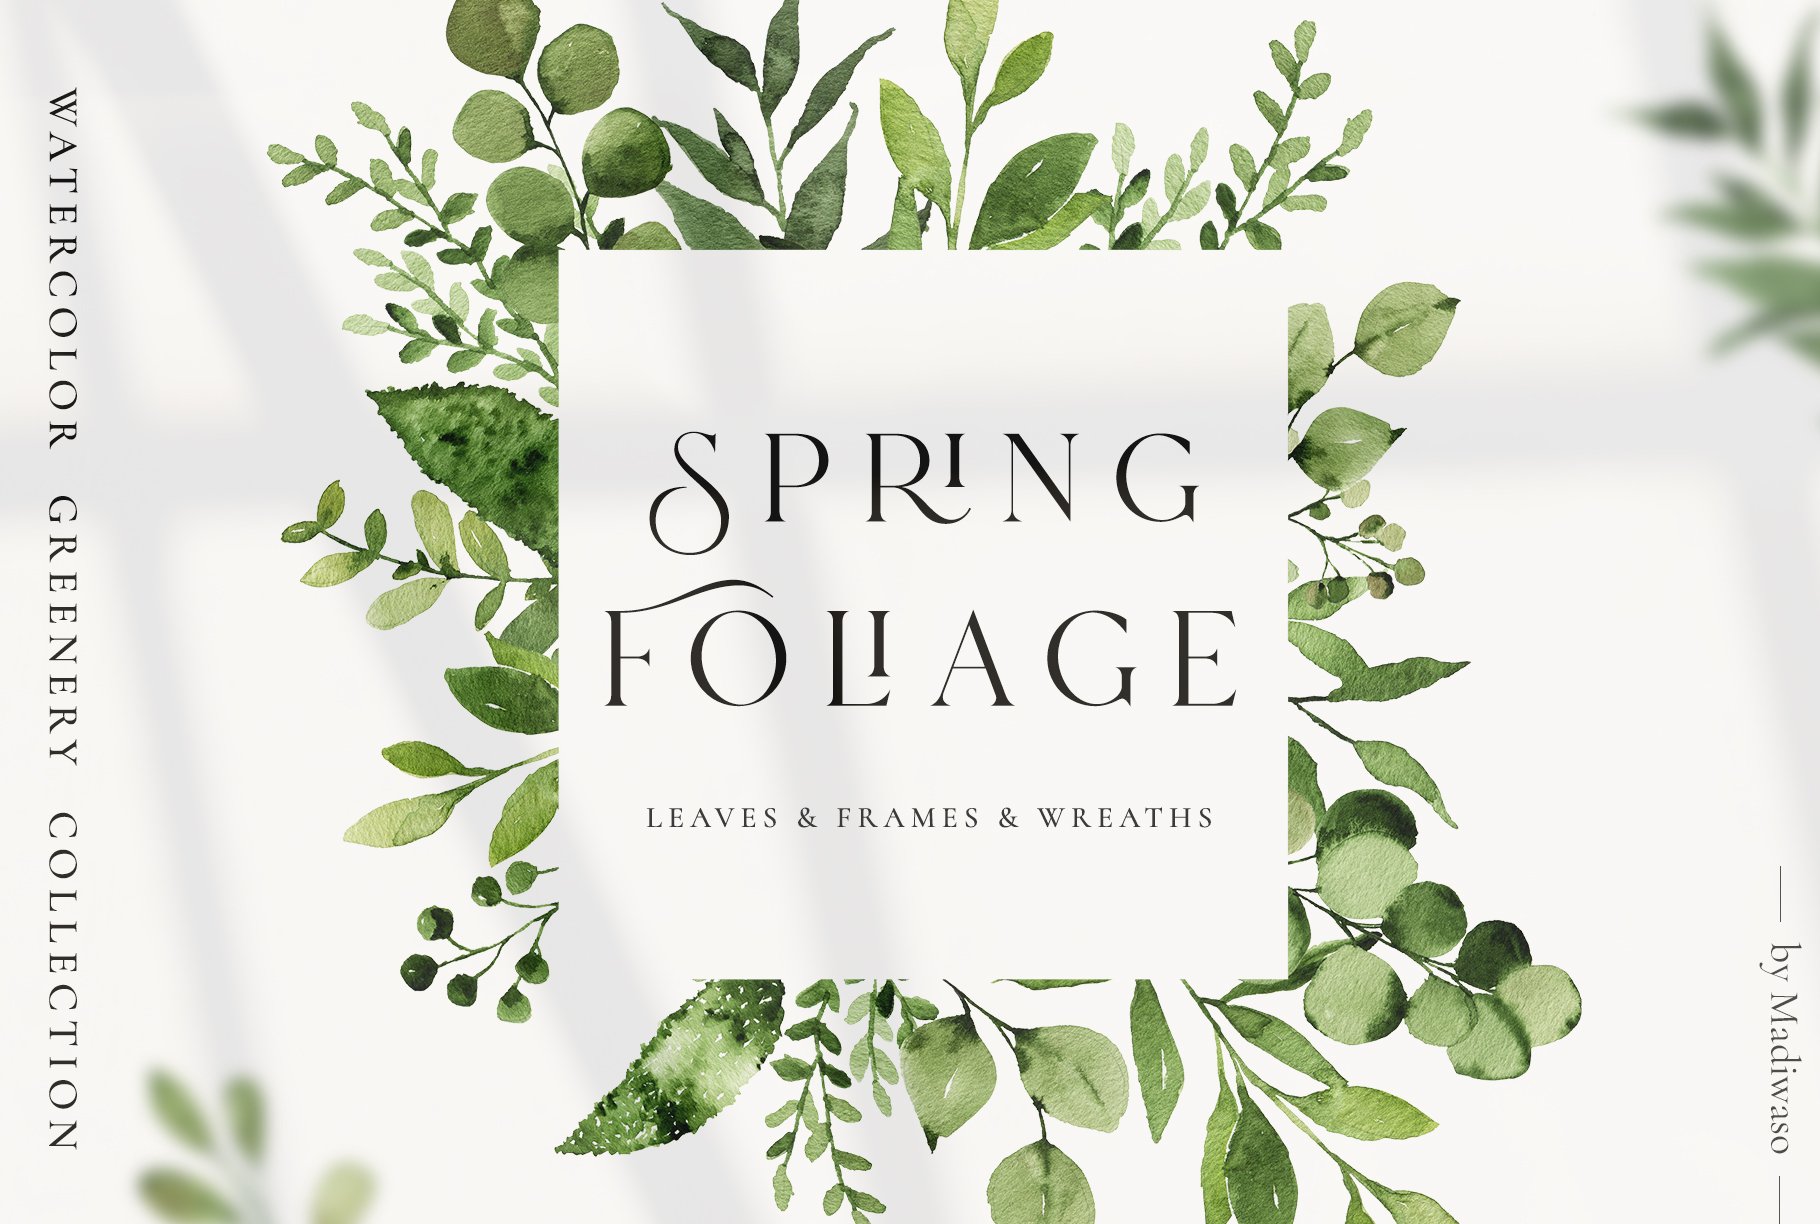 Spring Foliage greenery leaves cover image.